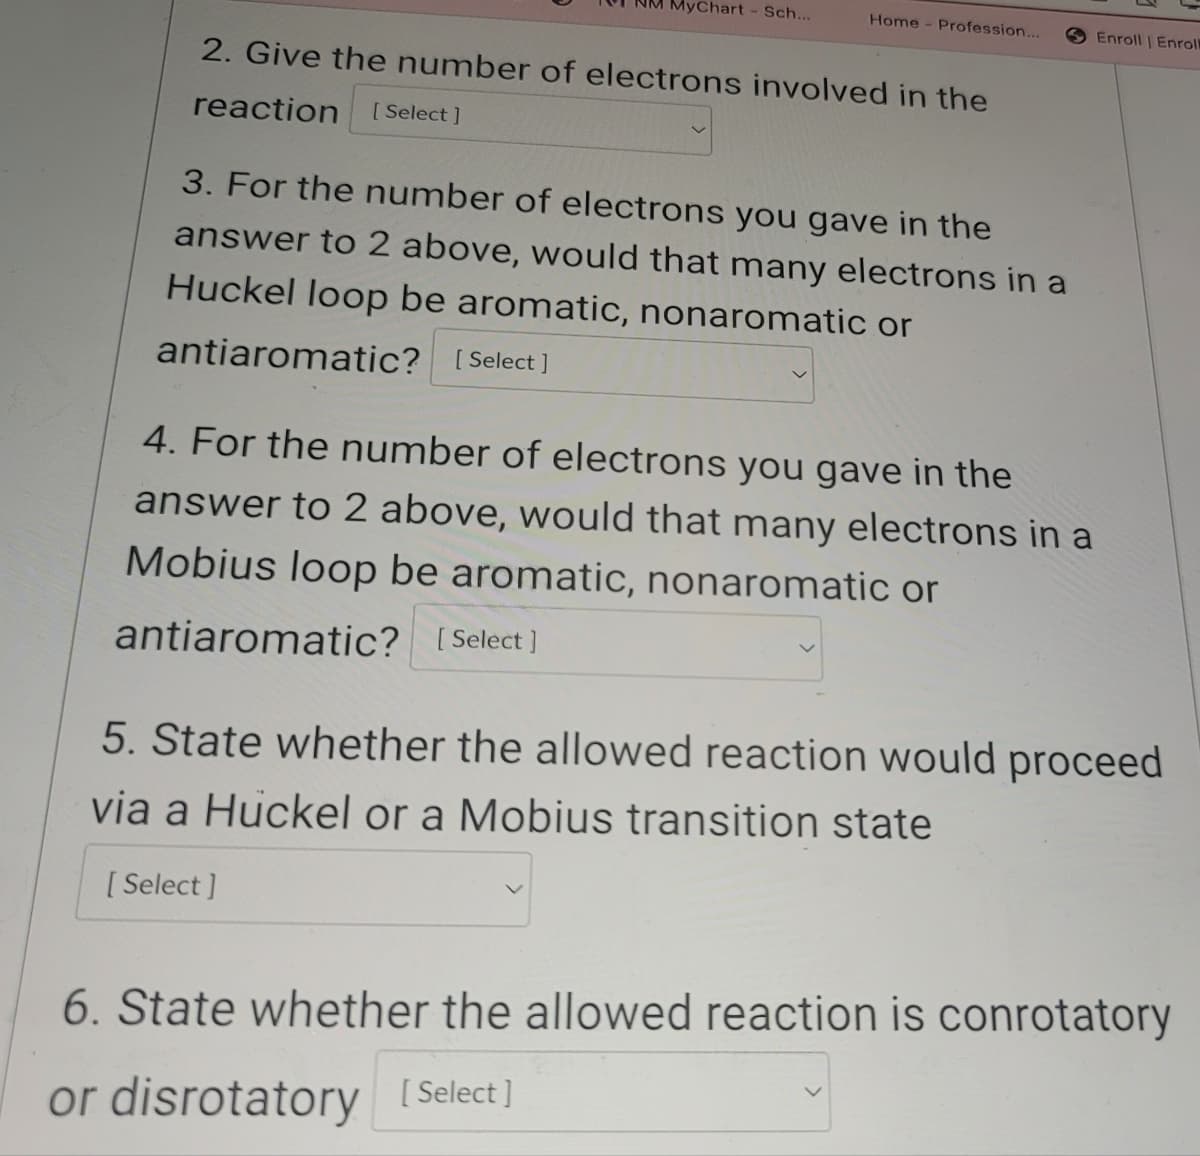 Chart - Sch...
Home - Profession...
Enroll | Enroll
2. Give the number of electrons involved in the
reaction
[Select]
3. For the number of electrons you gave in the
answer to 2 above, would that many electrons in a
Huckel loop be aromatic, nonaromatic or
antiaromatic? [Select]
4. For the number of electrons you gave in the
answer to 2 above, would that many electrons in a
Mobius loop be aromatic, nonaromatic or
antiaromatic? [Select]
5. State whether the allowed reaction would proceed
via a Huckel or a Mobius transition state
[Select]
6. State whether the allowed reaction is conrotatory
or disrotatory [Select]